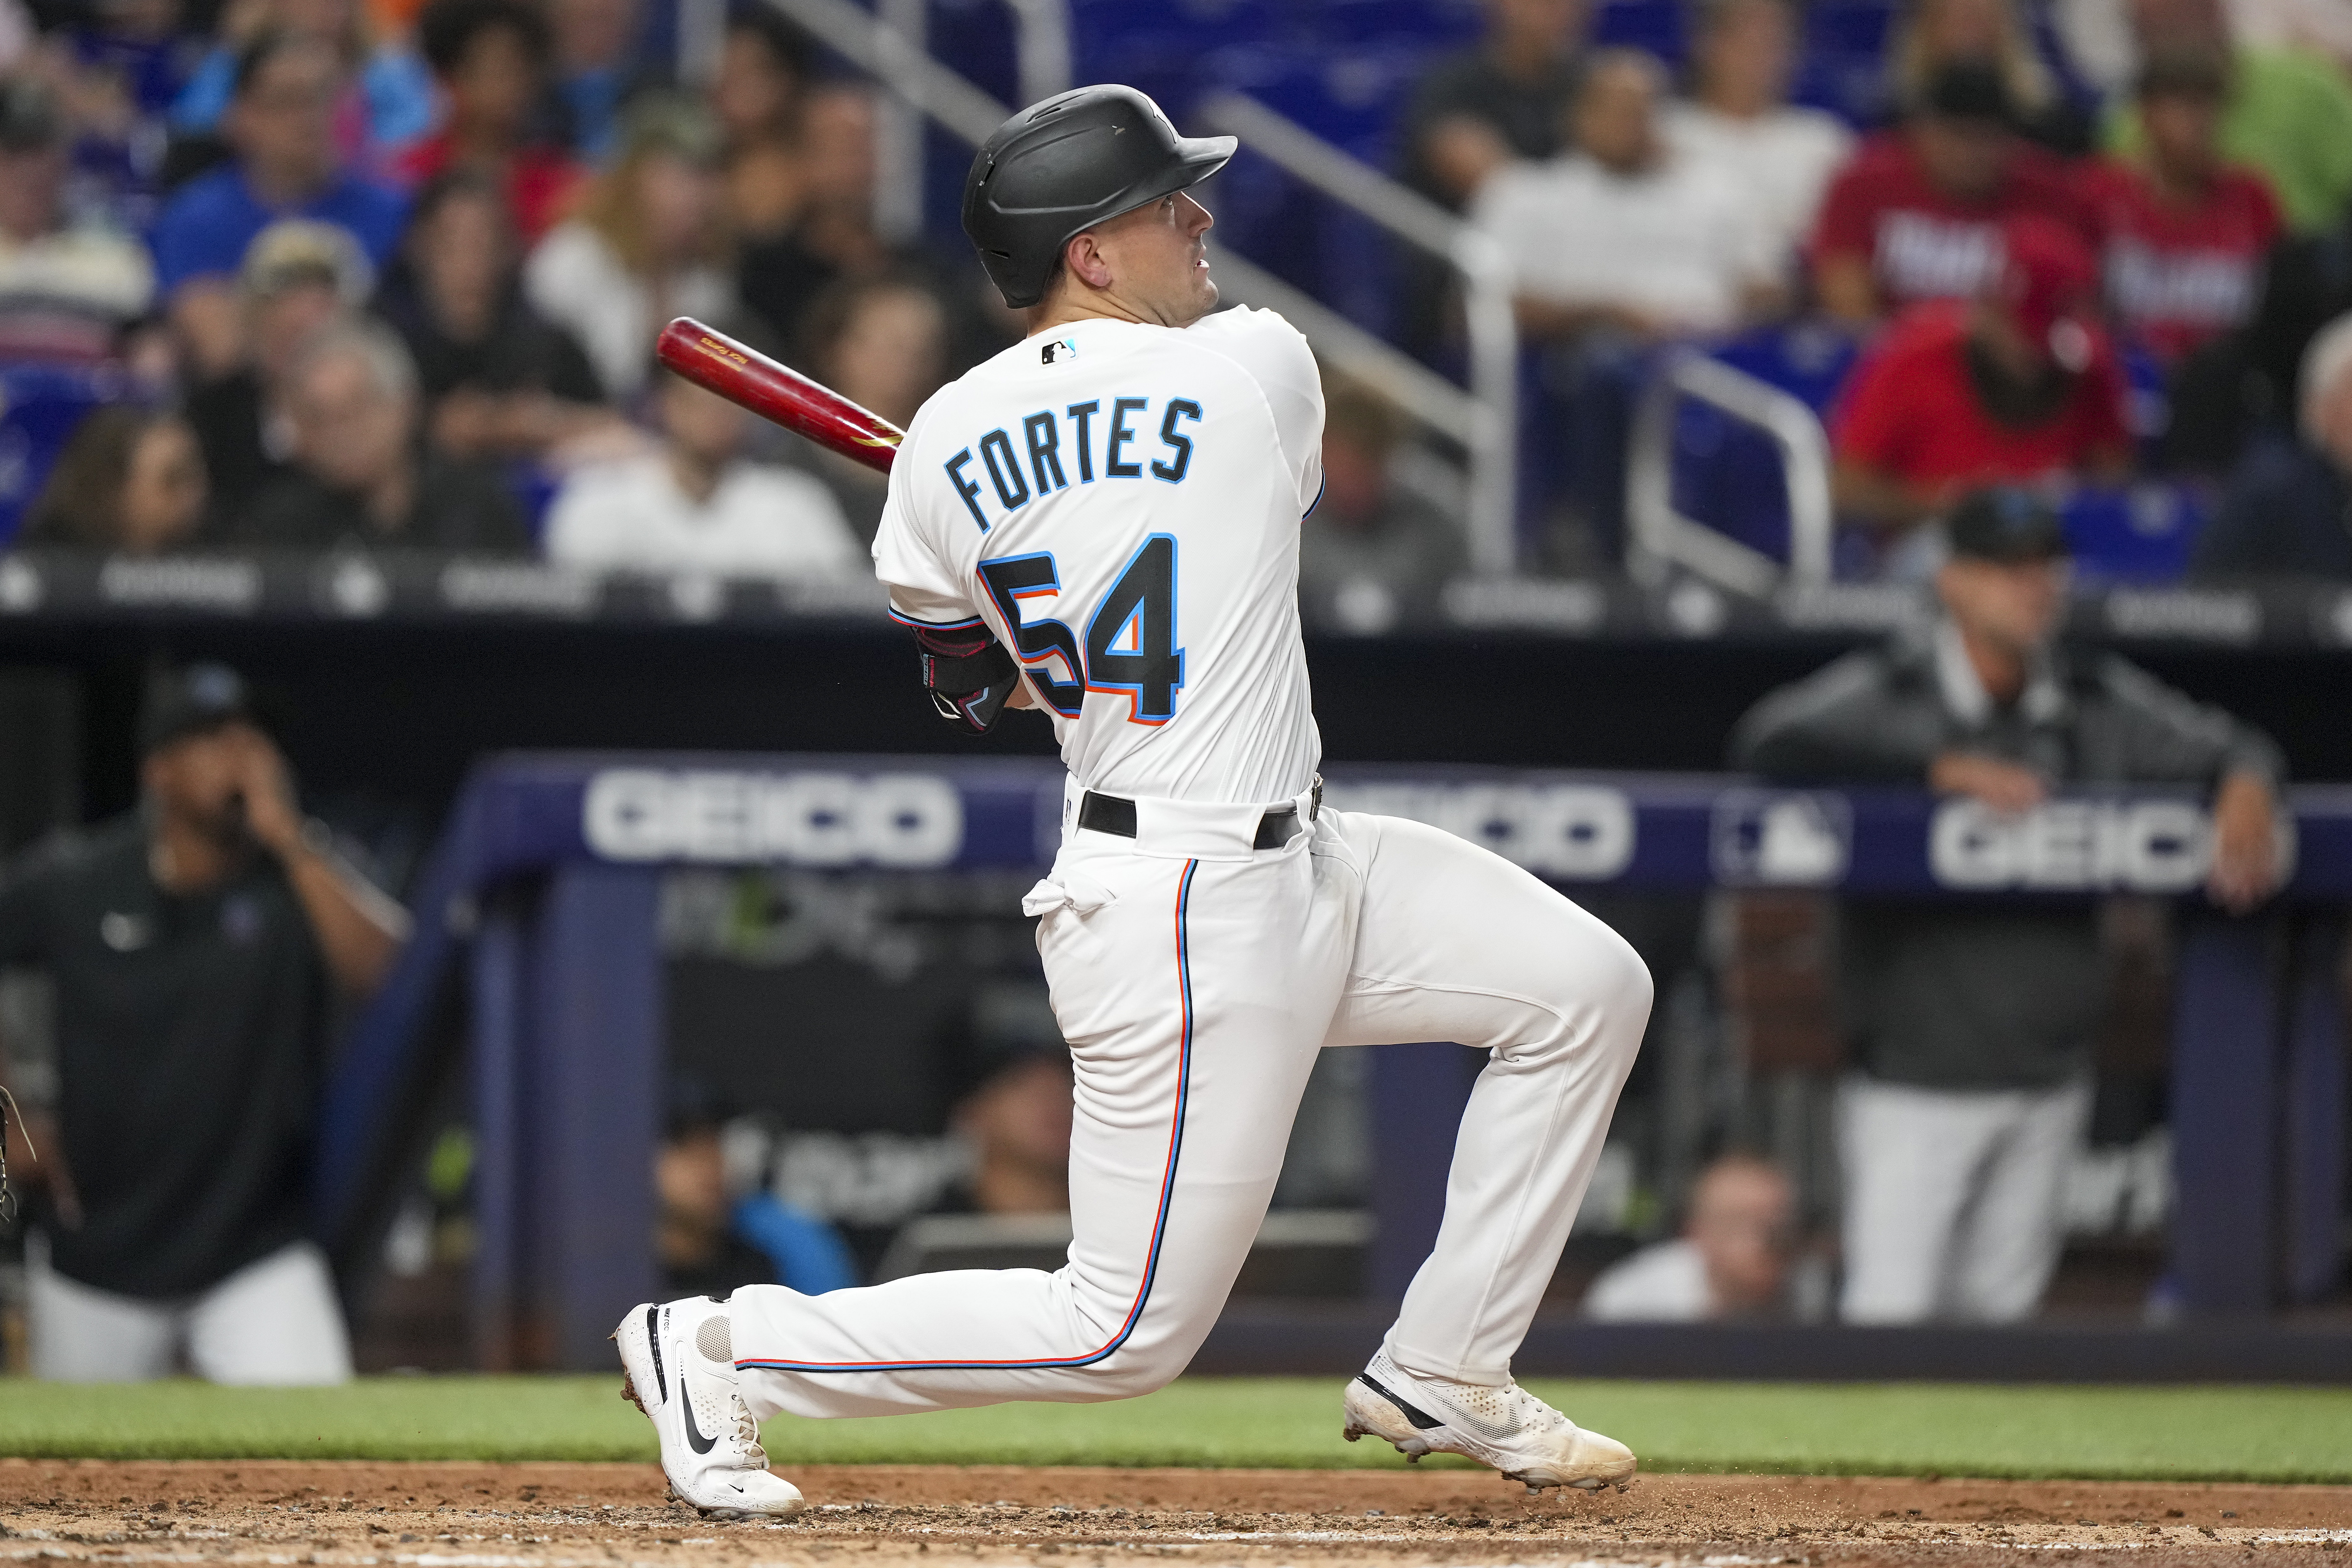 Nick Fortes #54 of the Miami Marlins hits a home run in the third inning against the San Diego Padres at loanDepot park on August 16, 2022 in Miami, Florida.